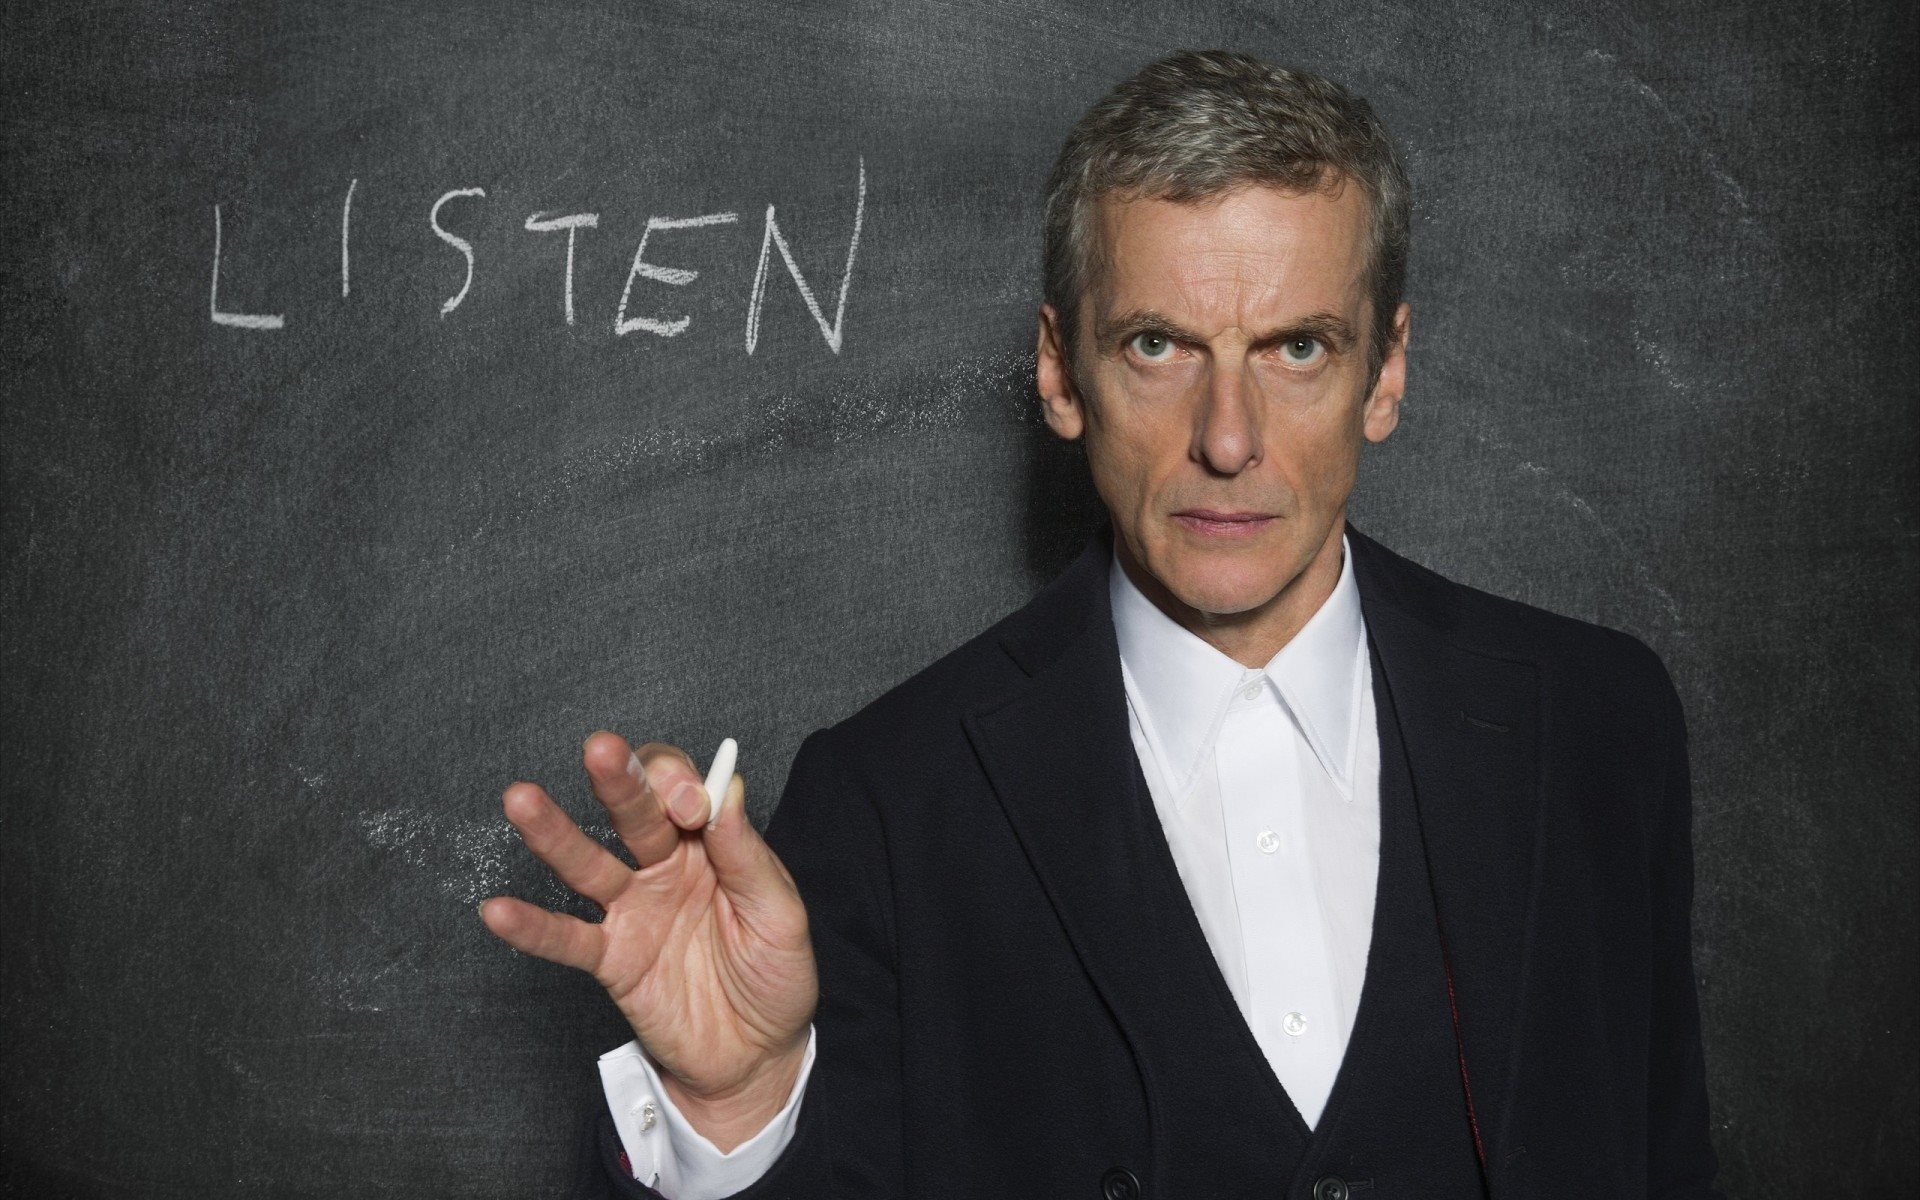 Doctor Who, Peter Capaldi, High-quality pictures, 1920x1200 HD Desktop